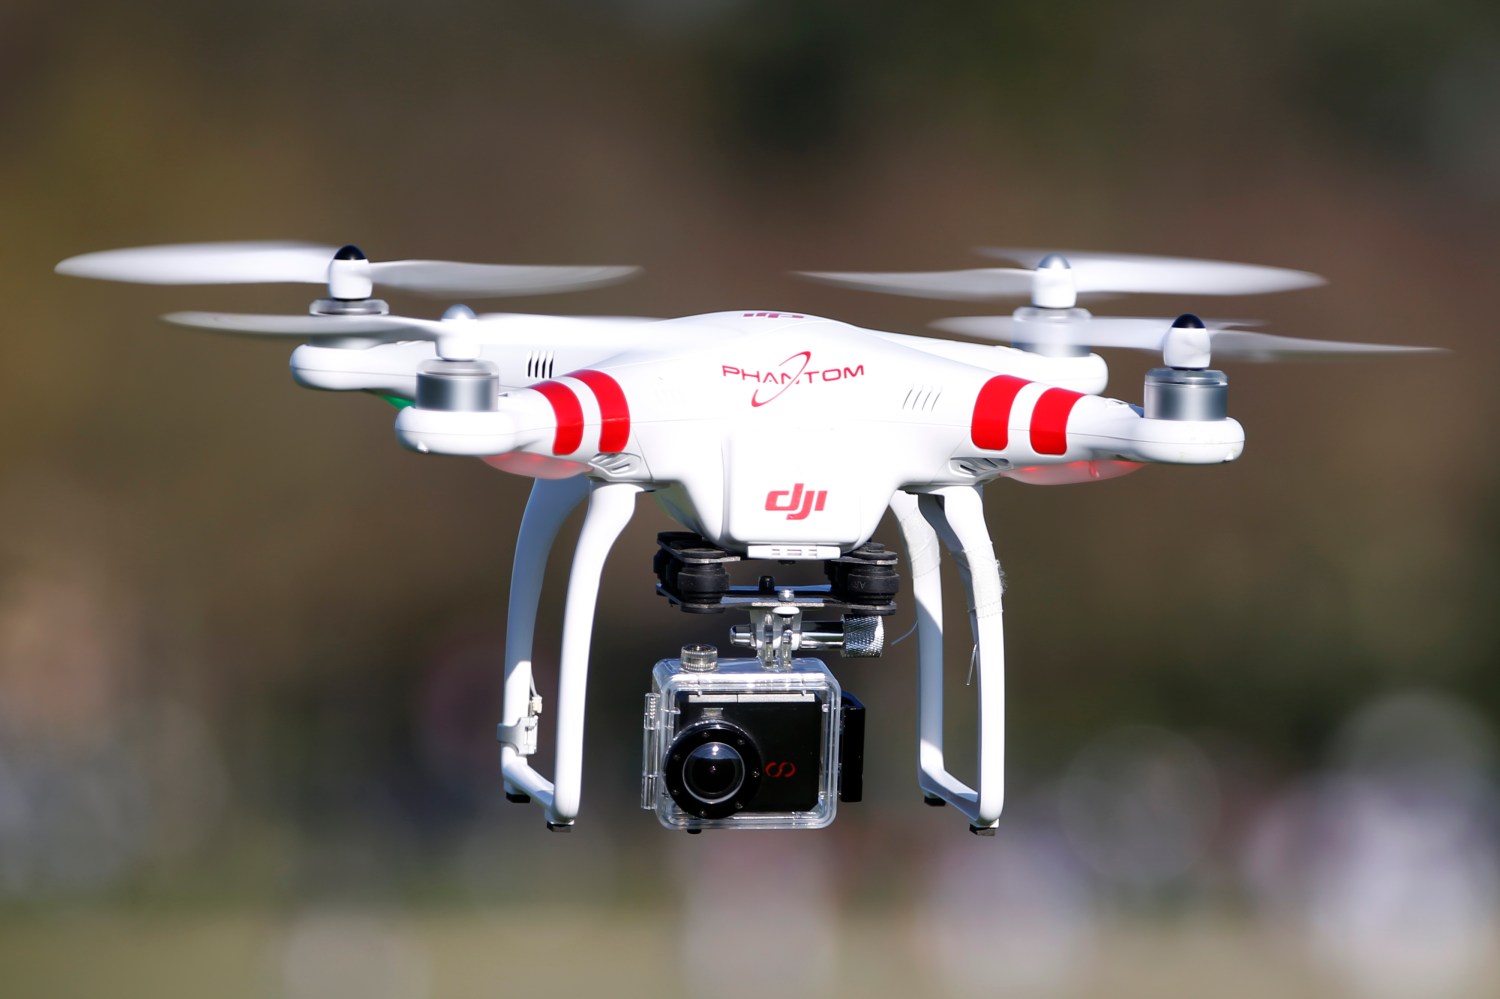 A Phantom drone by DJI company, equipped with a camera, flies during the 4th Intergalactic Meeting of Phantom's Pilots (MIPP) in an open secure area in the Bois de Boulogne, western Paris, March 16, 2014. REUTERS/Charles Platiau